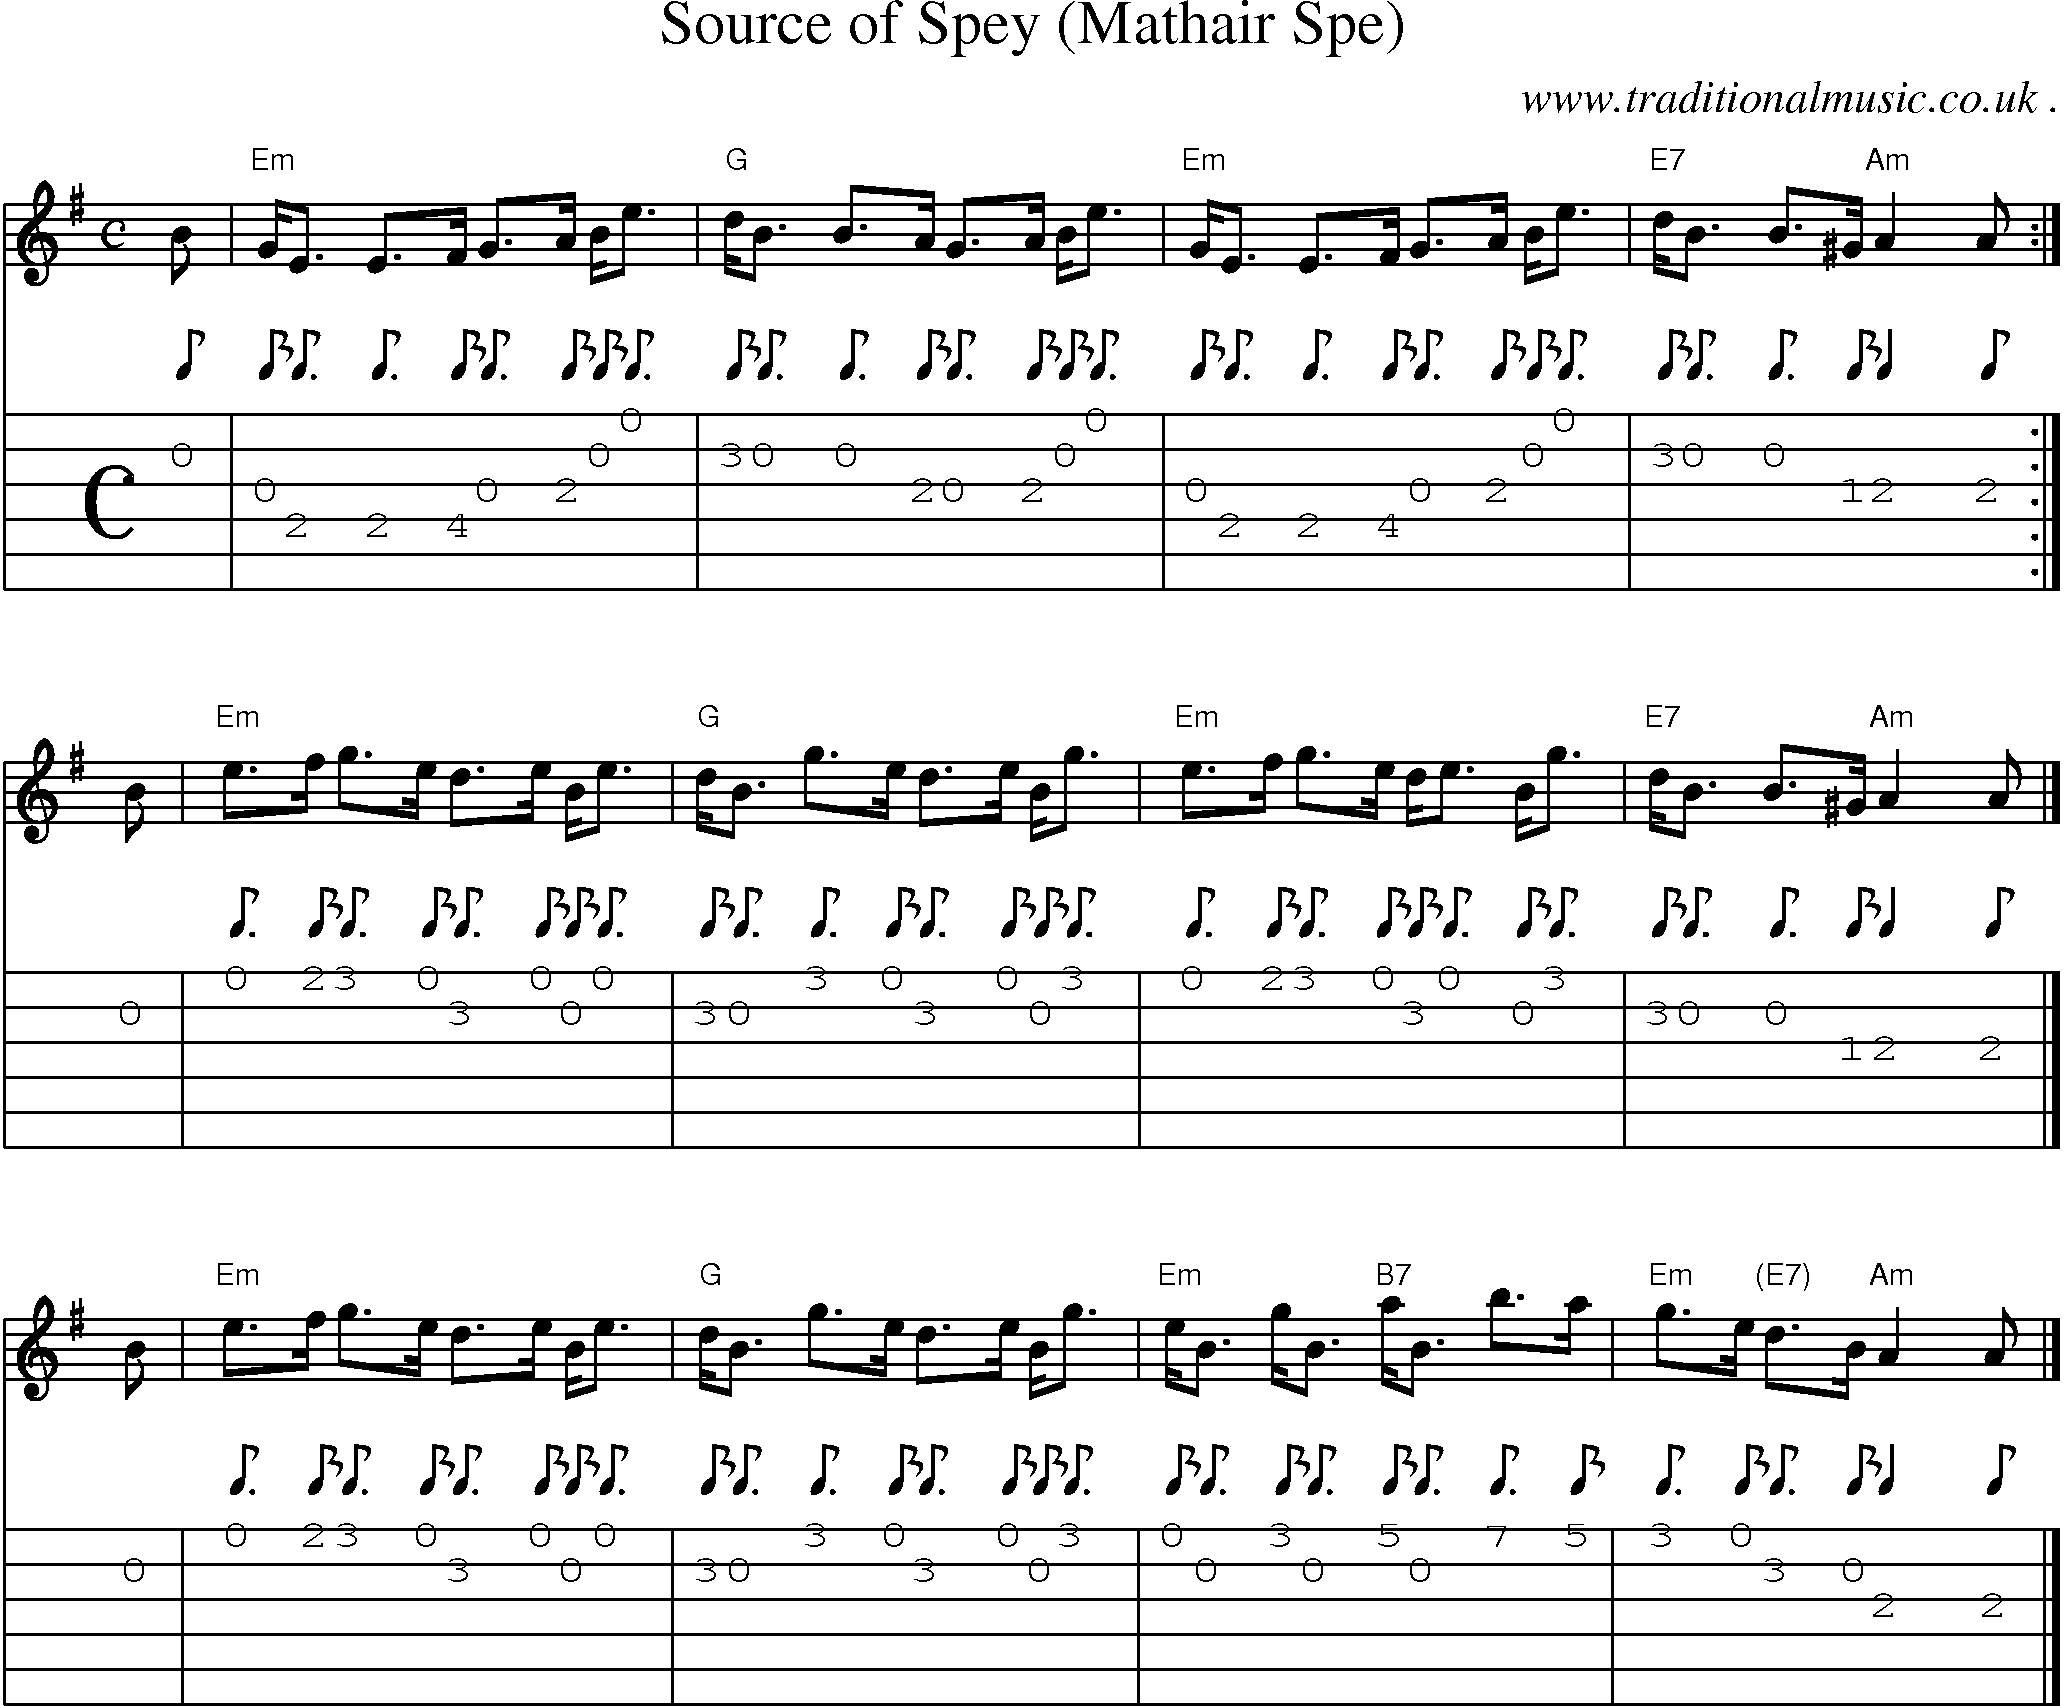 Sheet-music  score, Chords and Guitar Tabs for Source Of Spey Mathair Spe